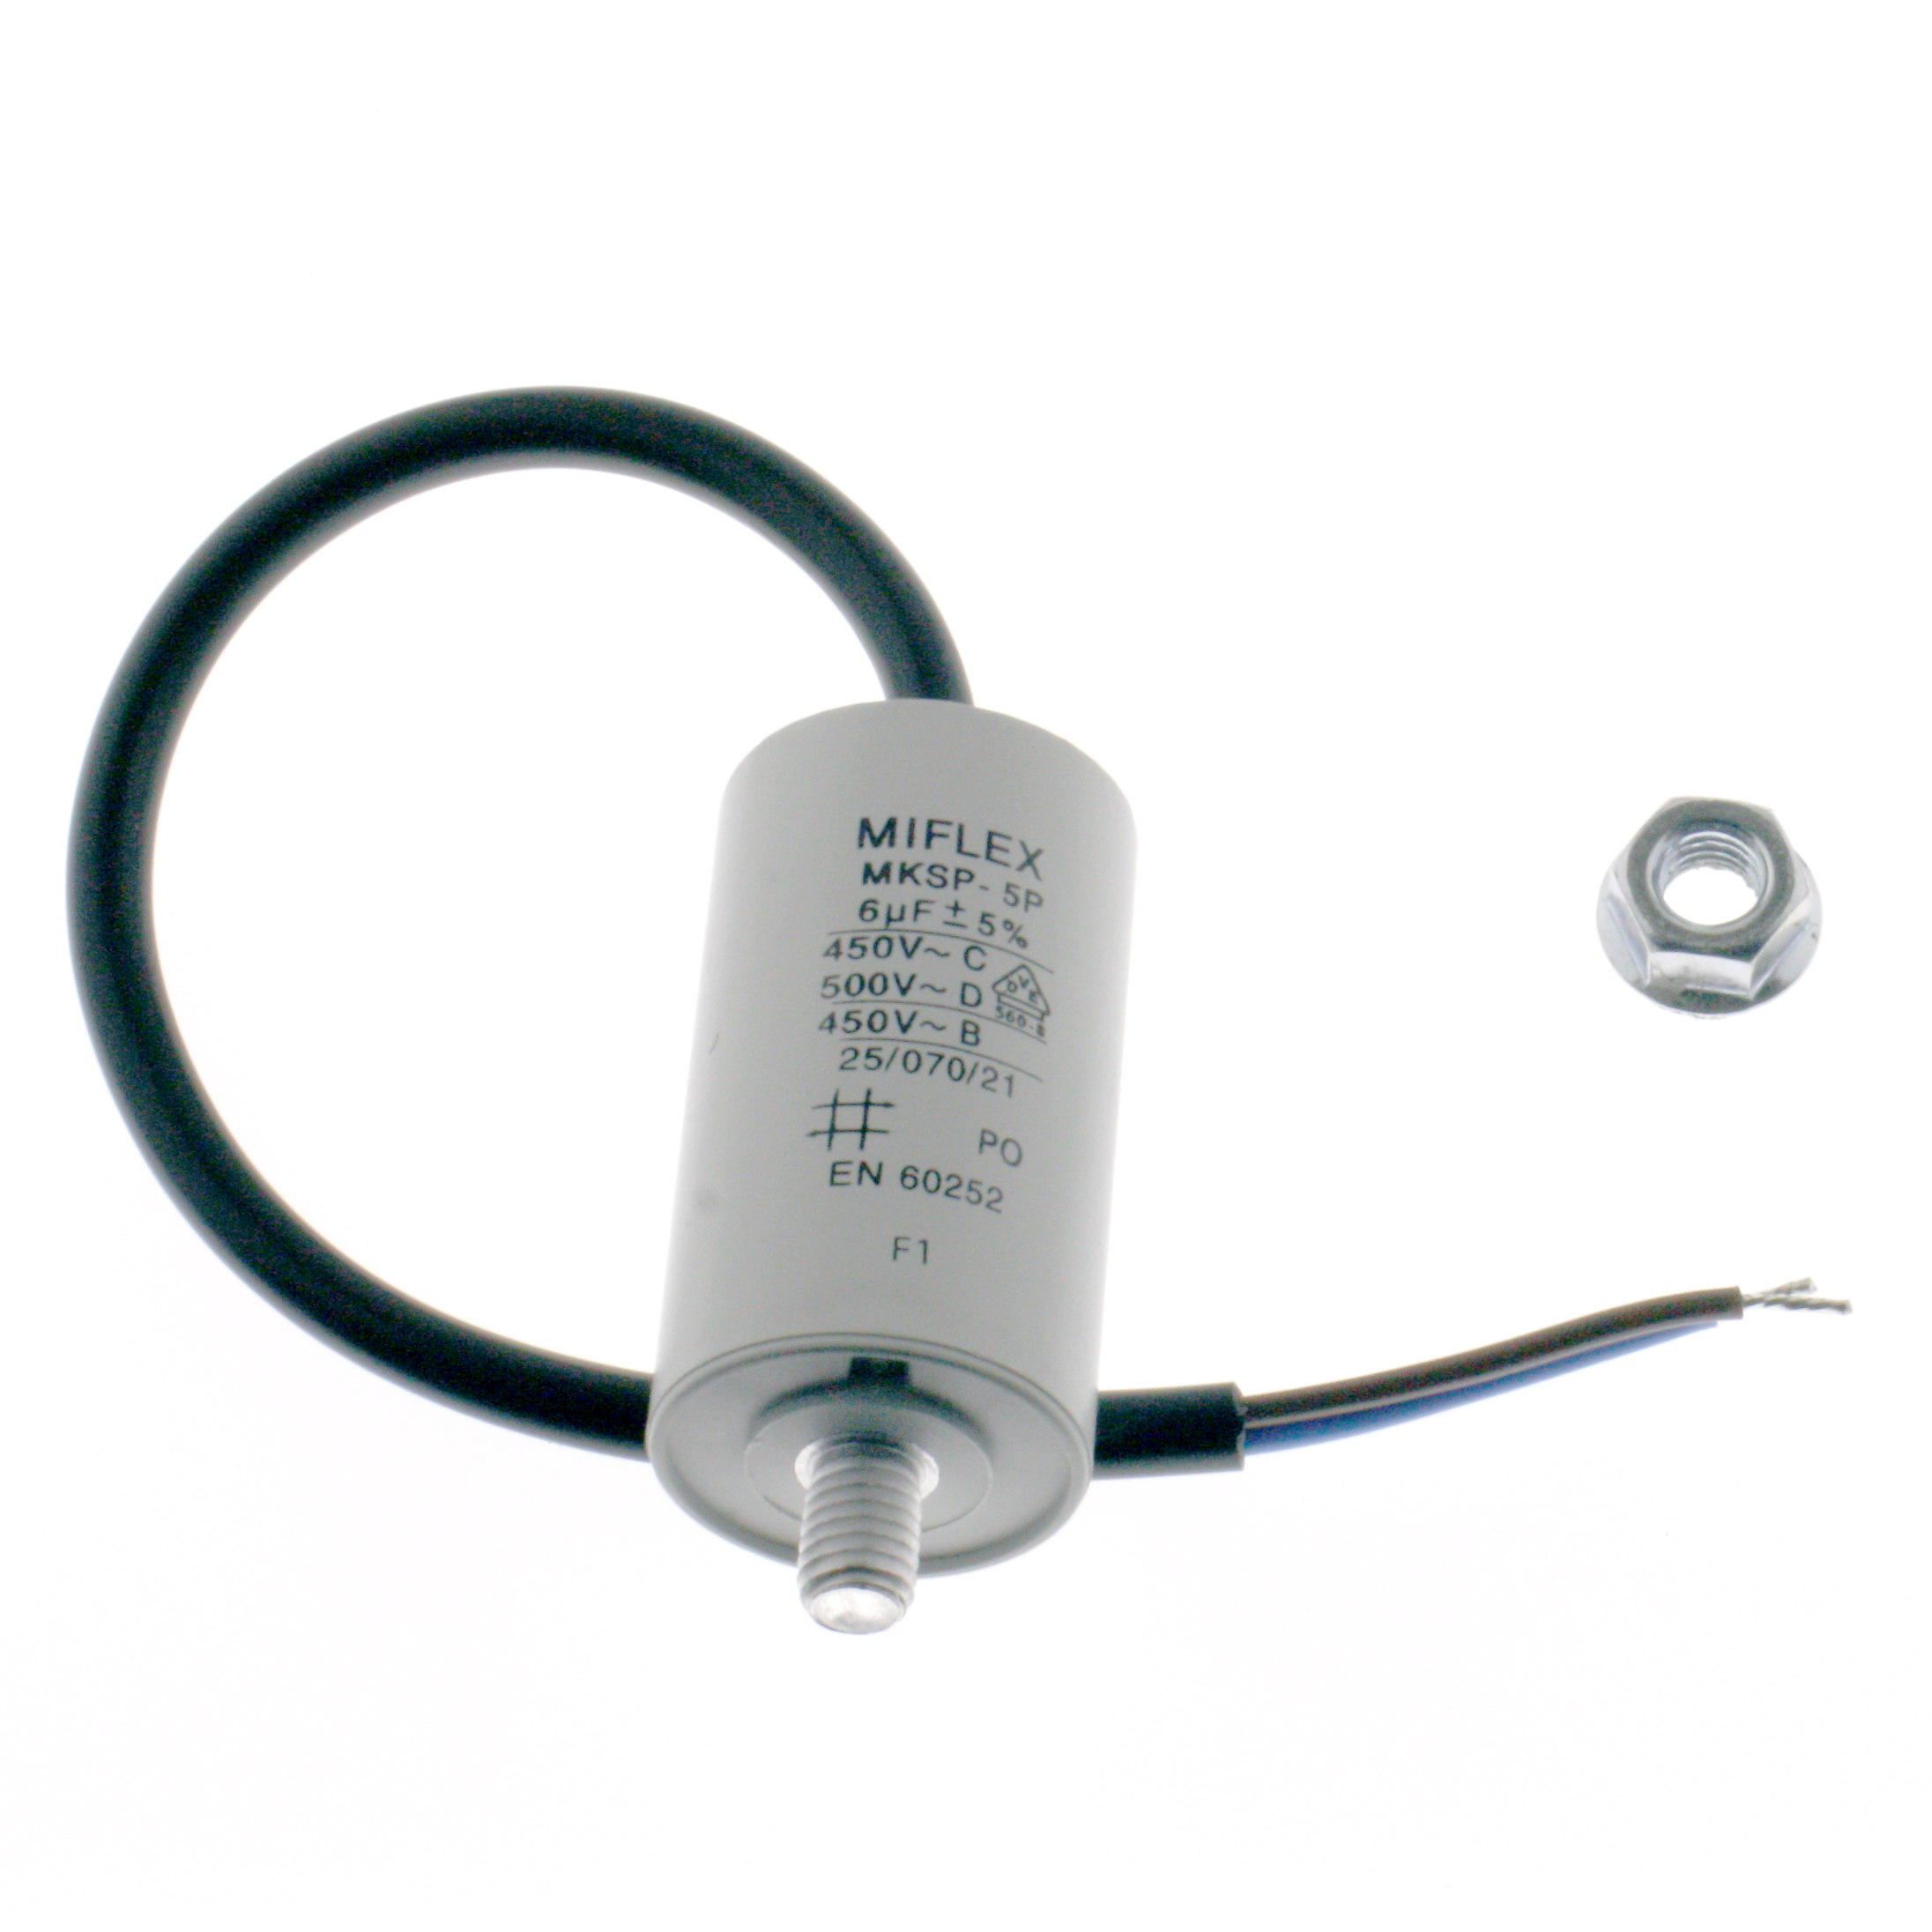 Motor Capacitor 6uF-450V, 30x53mm, cable connection